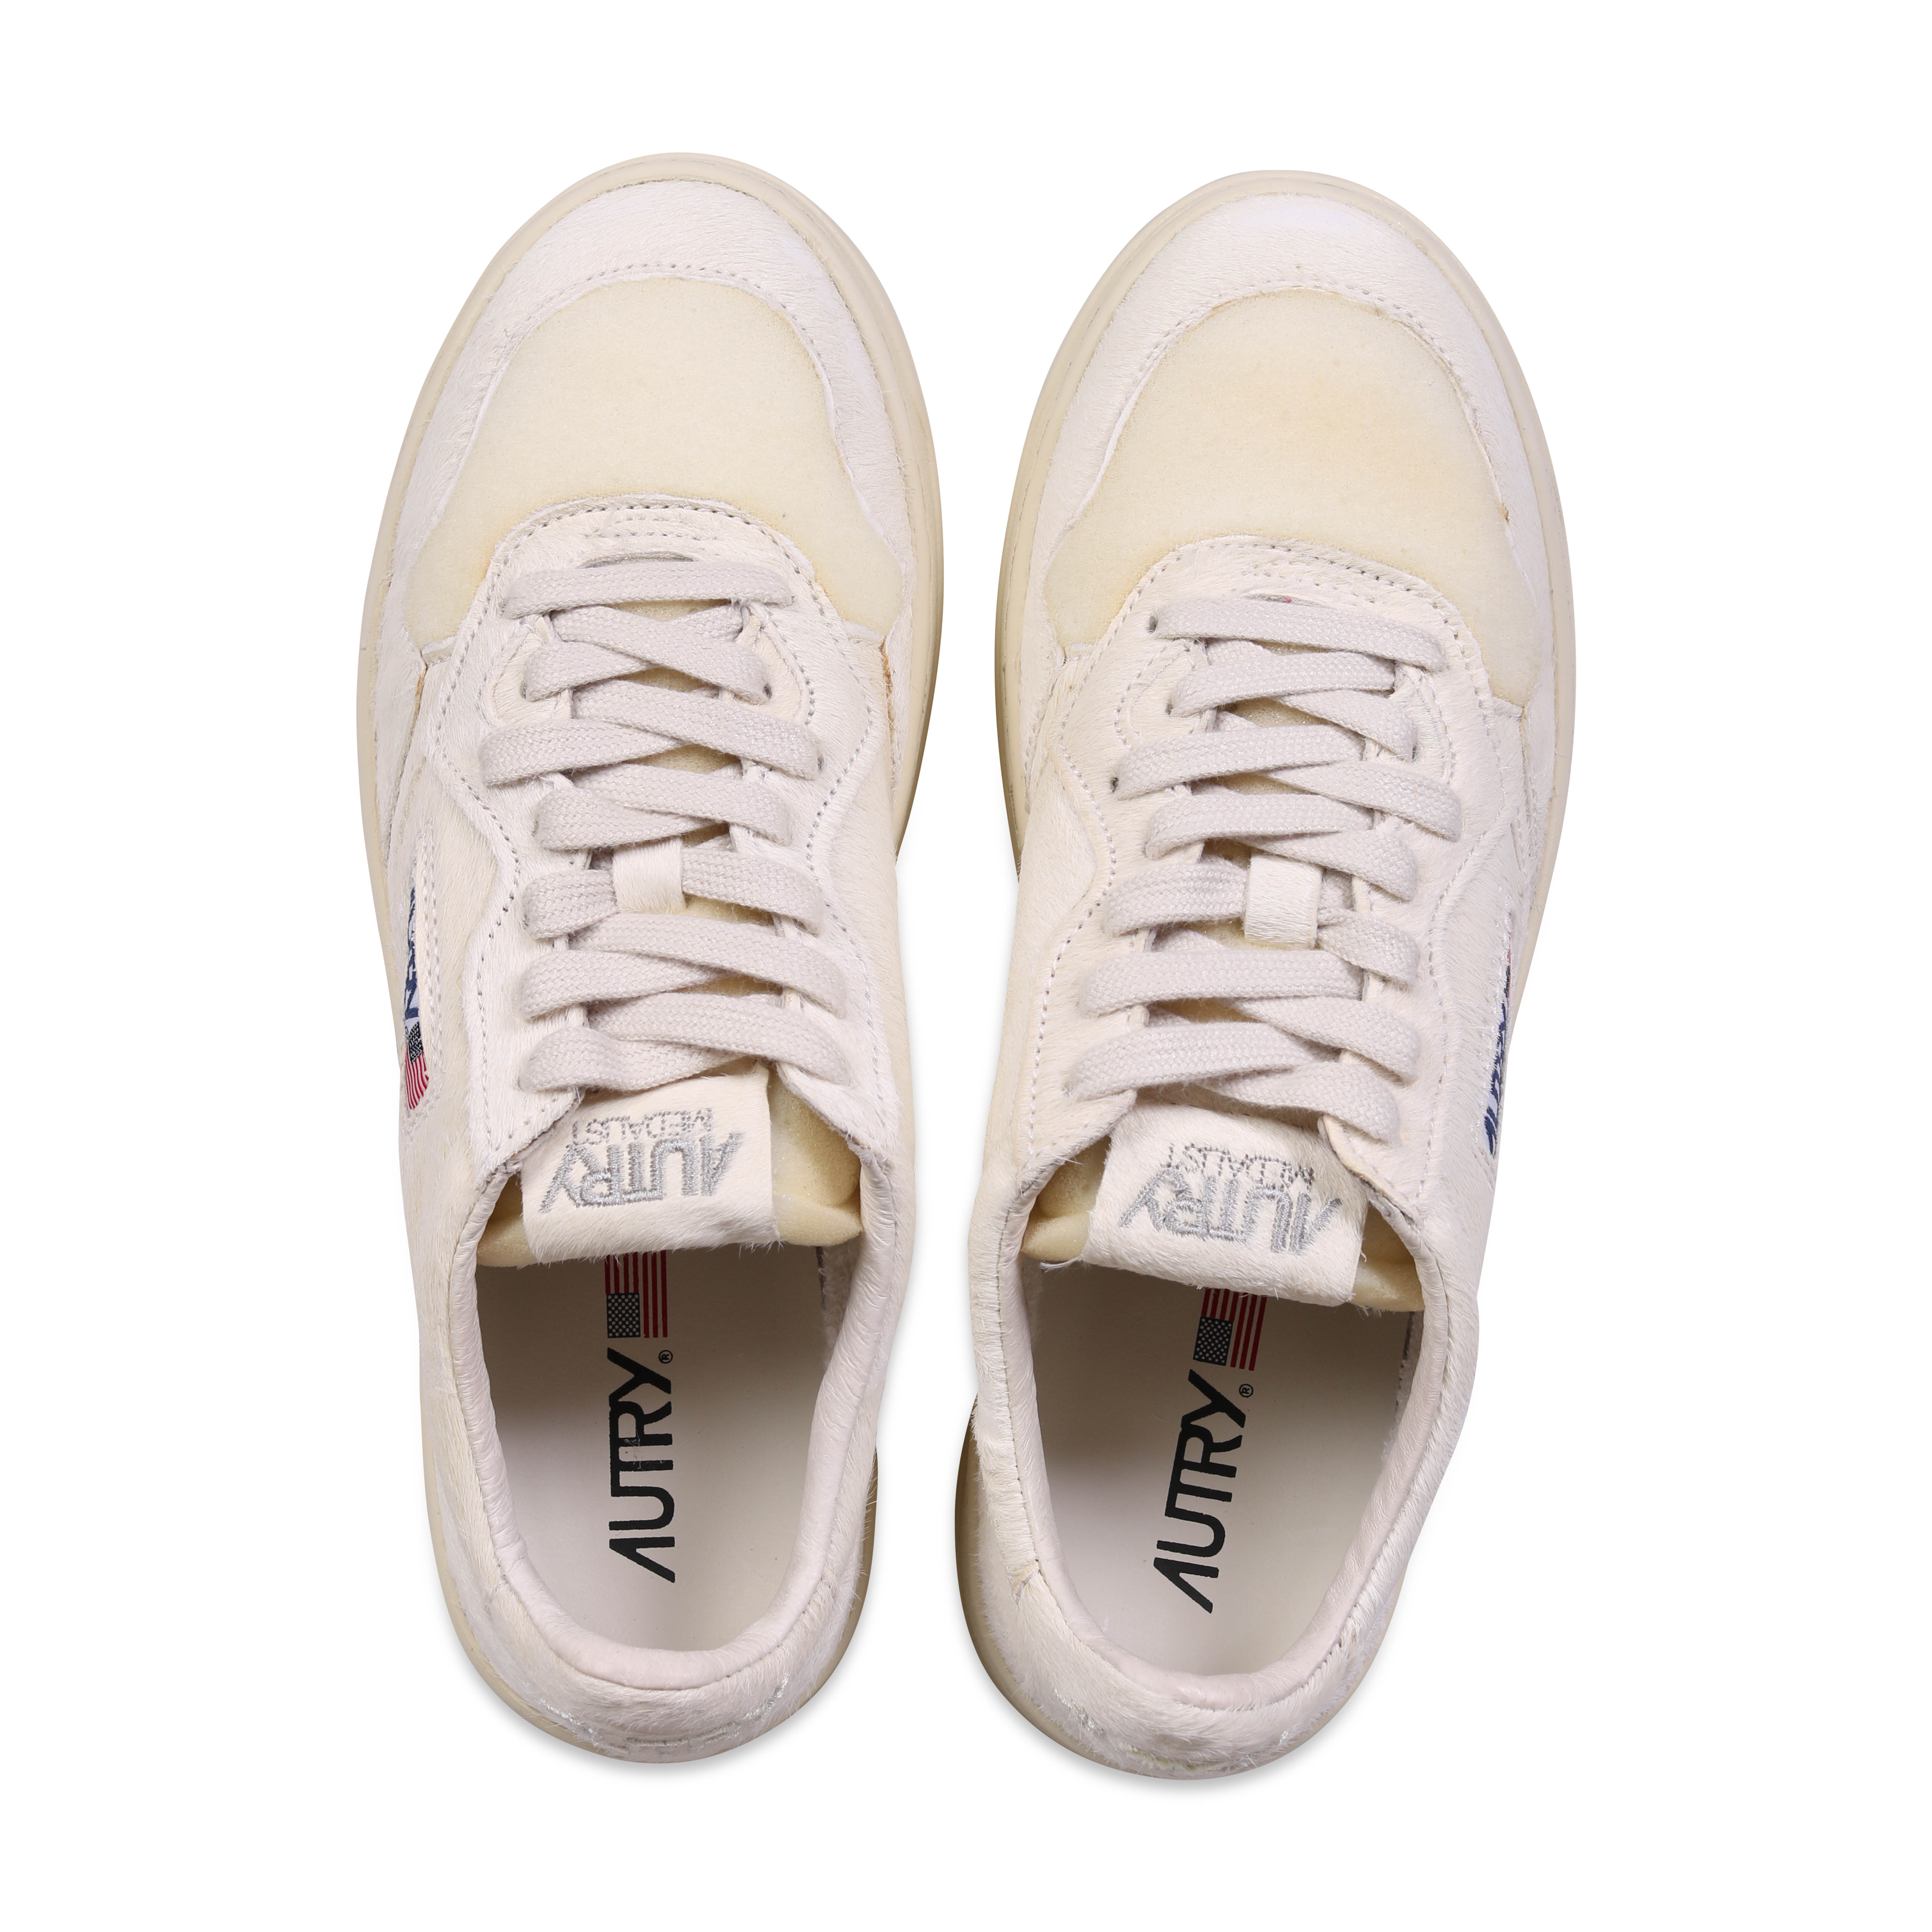 Autry Action Shoes Low Sneaker Pony